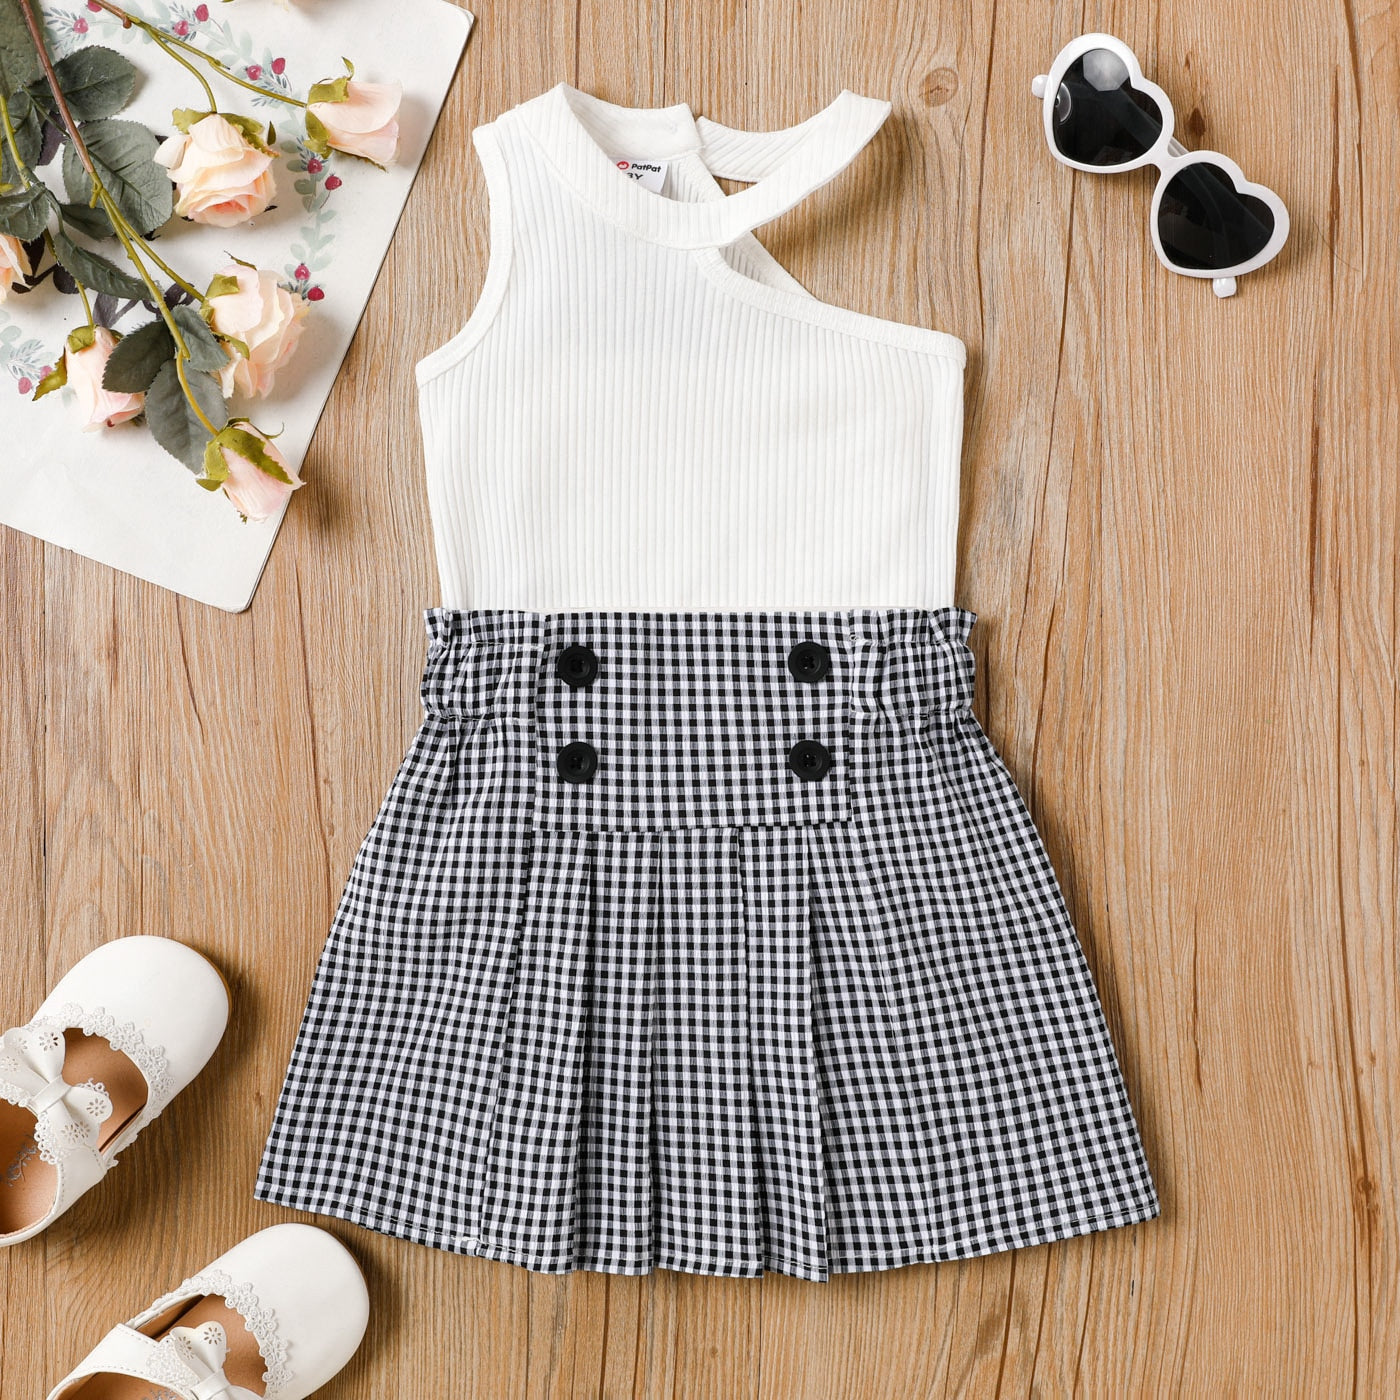 Toddler Girl 2 pcs cotton One-Shoulder Top and Button Plaid Skirt Set